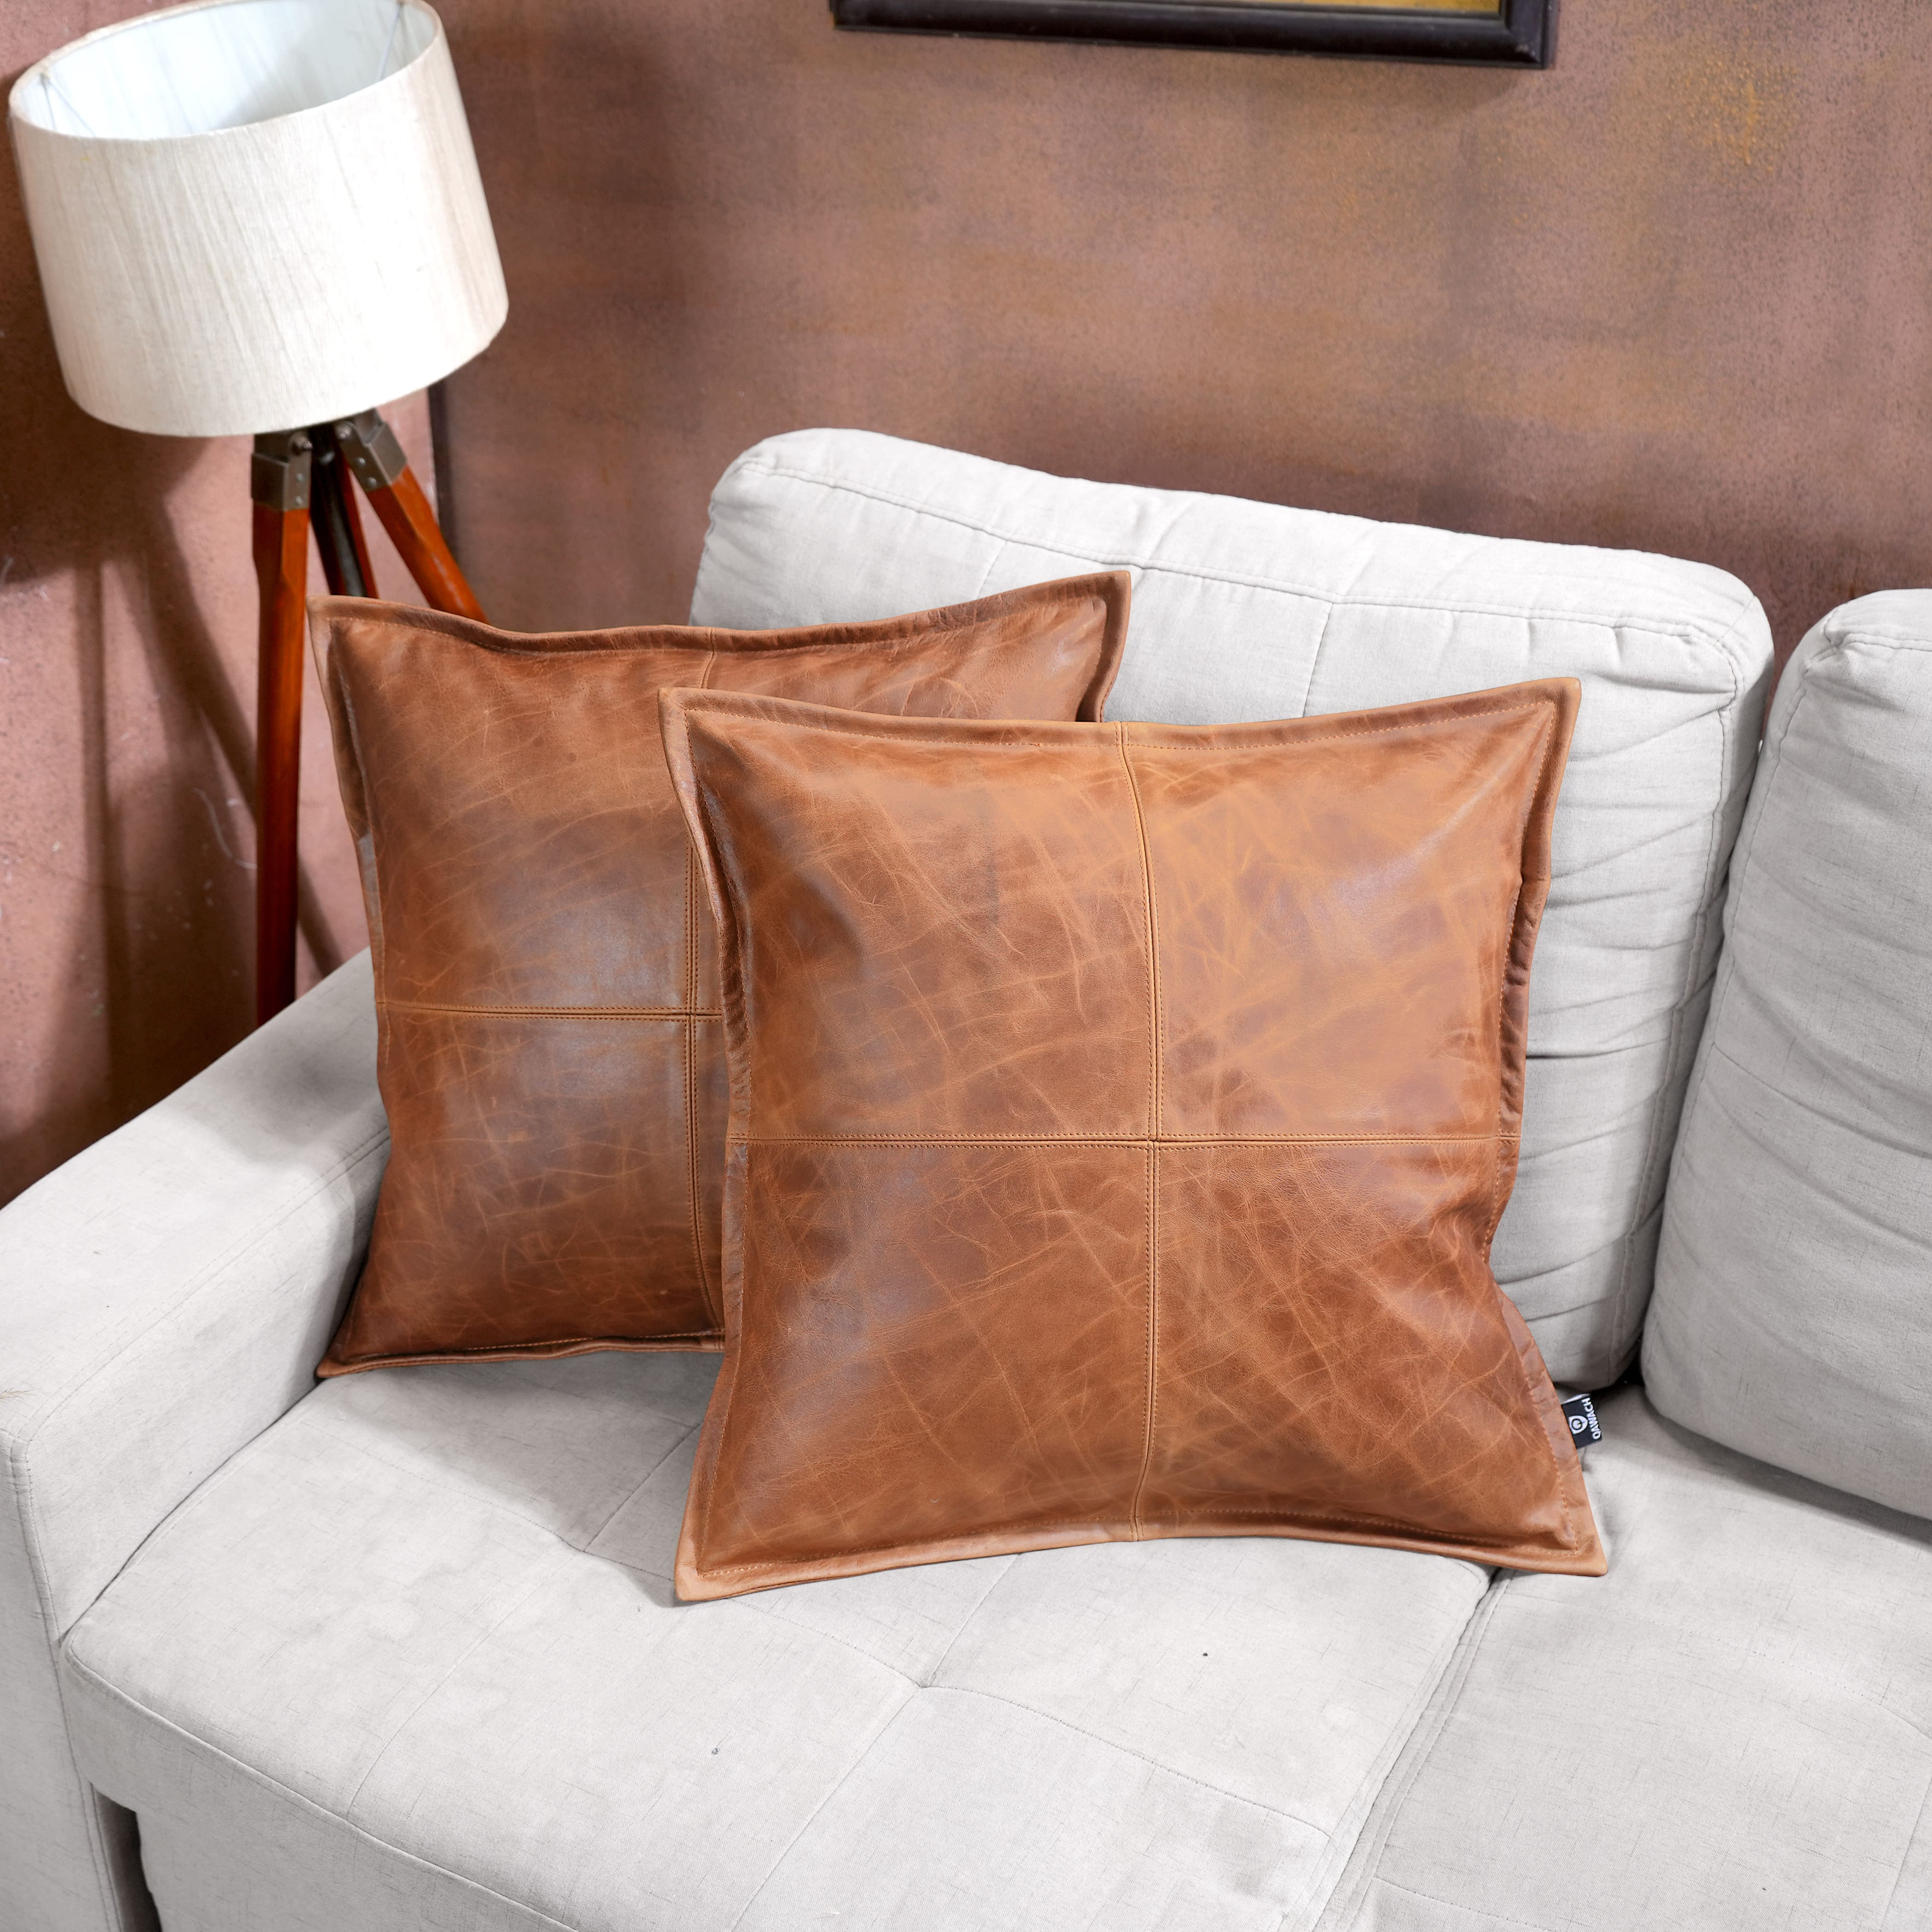 Shop Brown Leather Pillow Cover | QAWACH